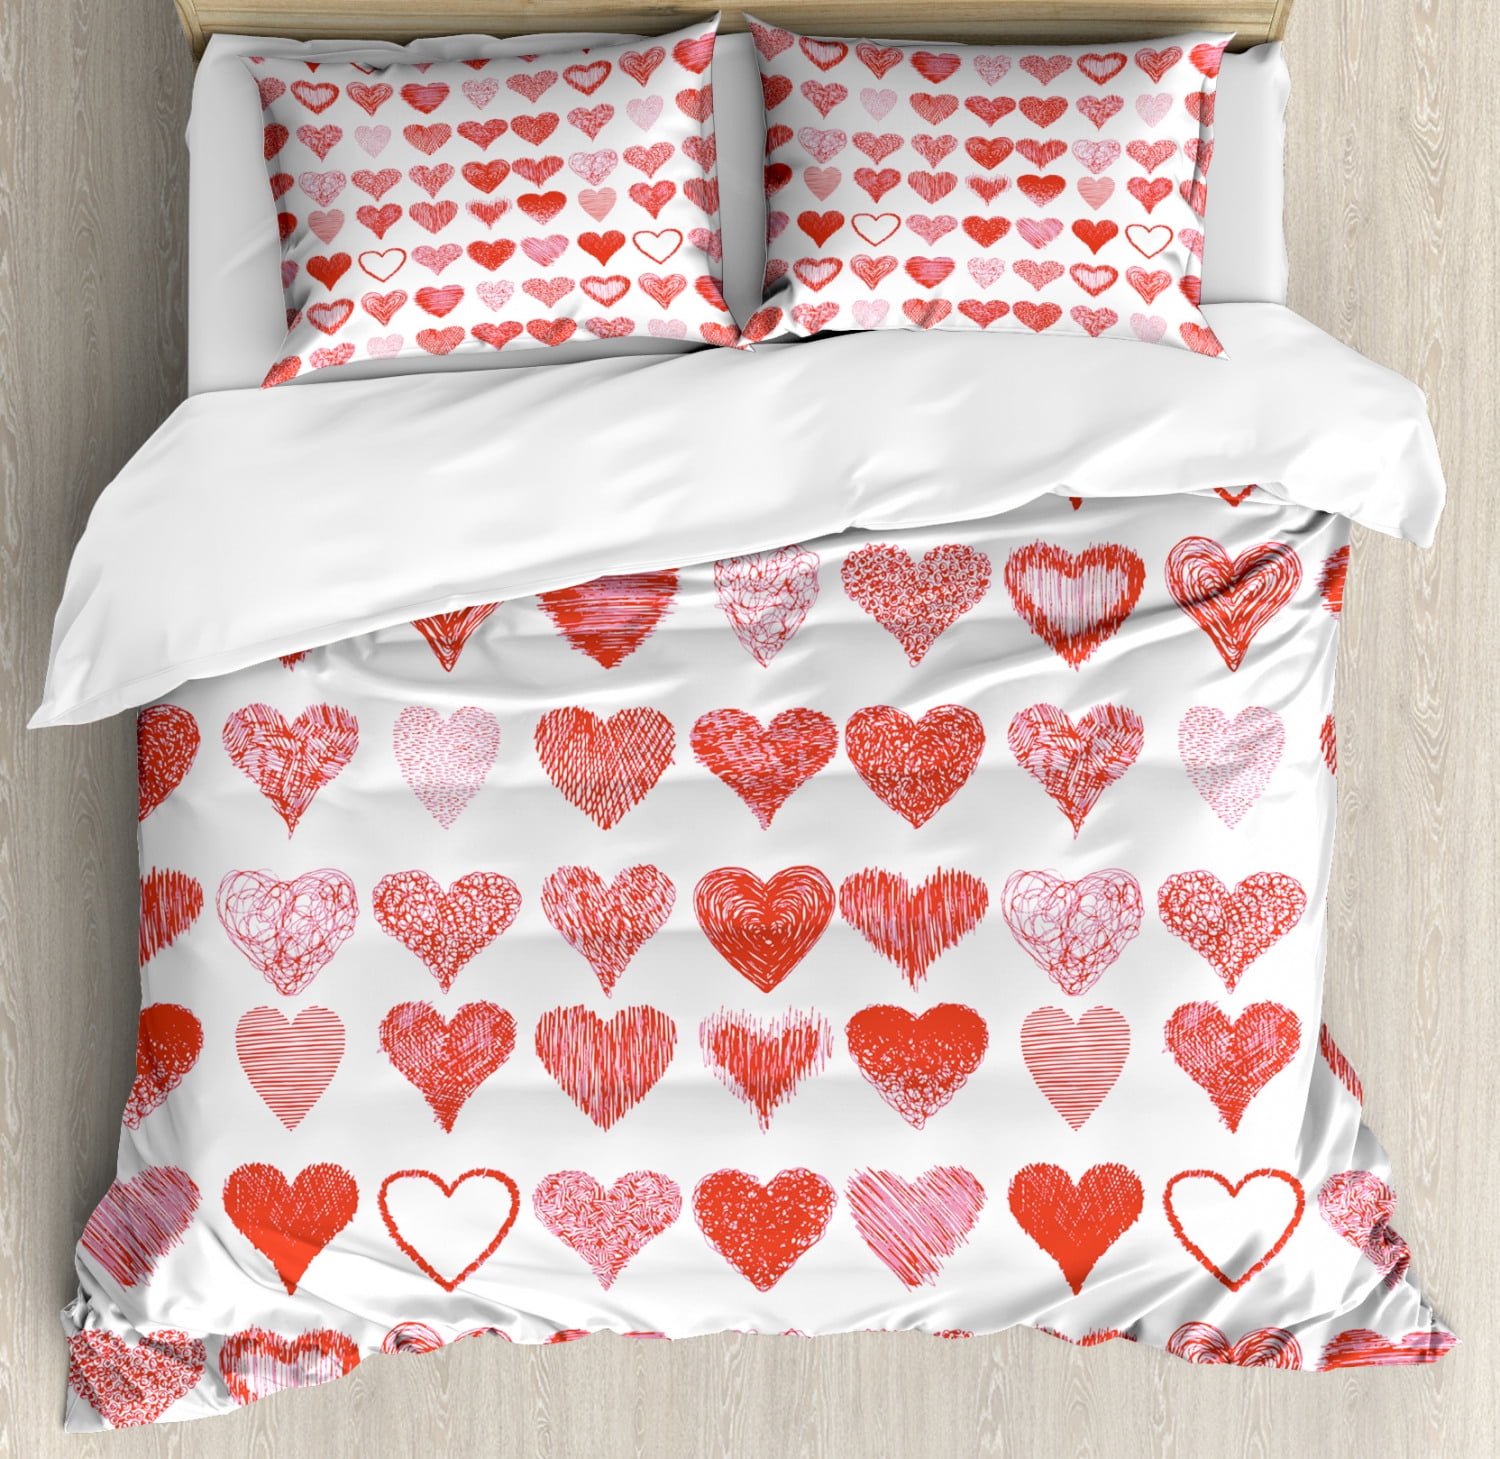 Love Duvet Cover Set Twin Queen King Sizes with Pillow Shams Bedding